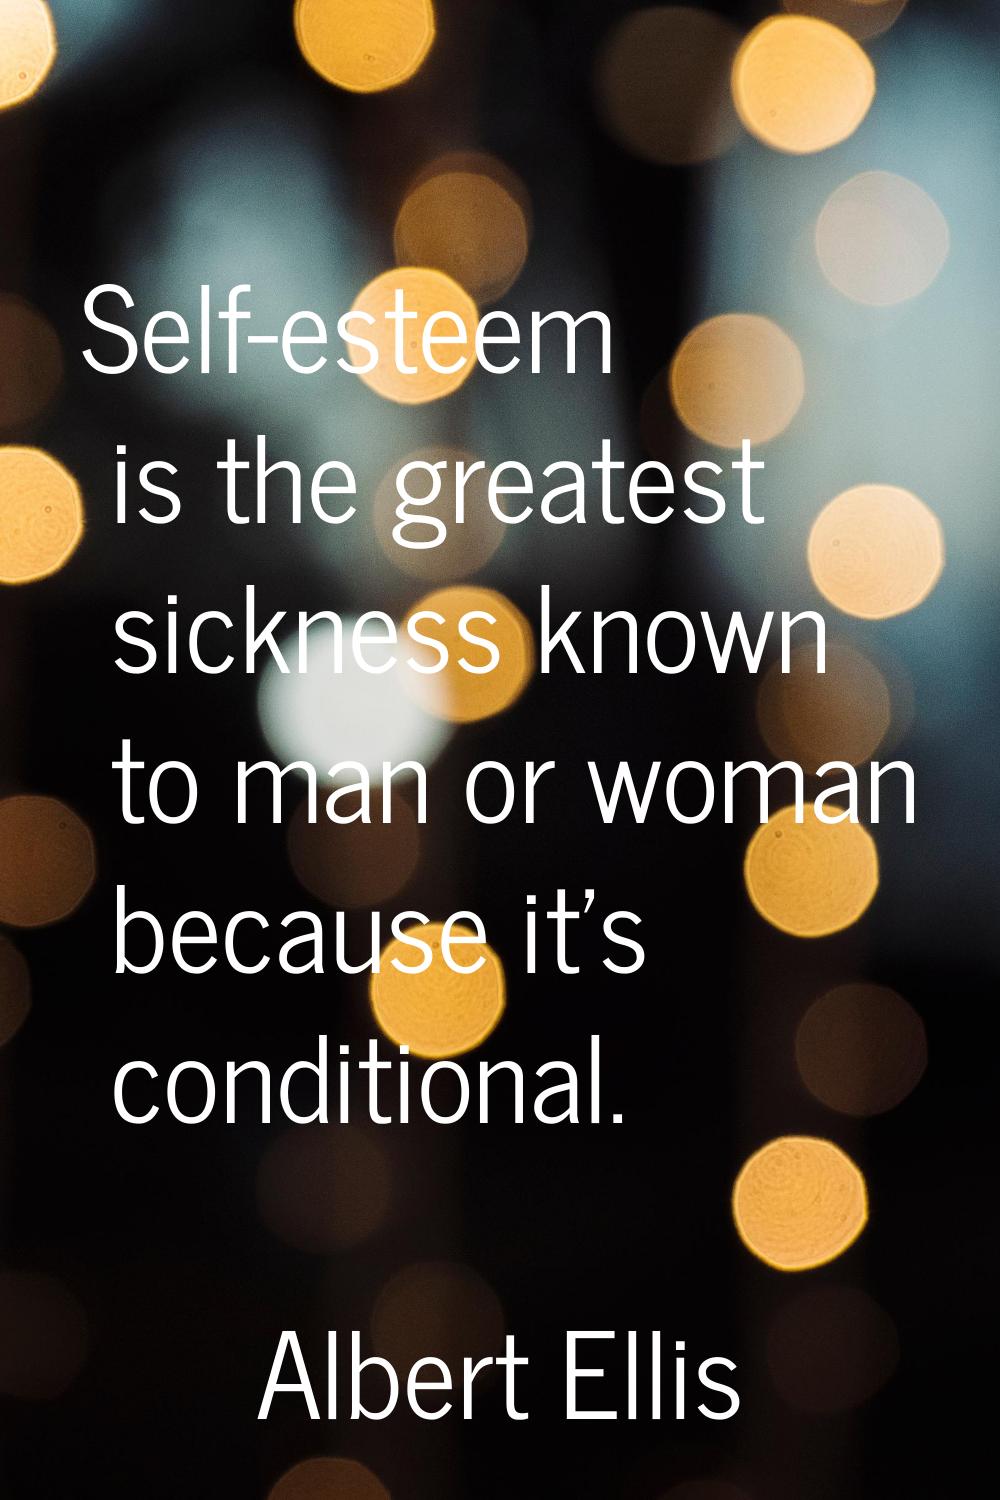 Self-esteem is the greatest sickness known to man or woman because it's conditional.